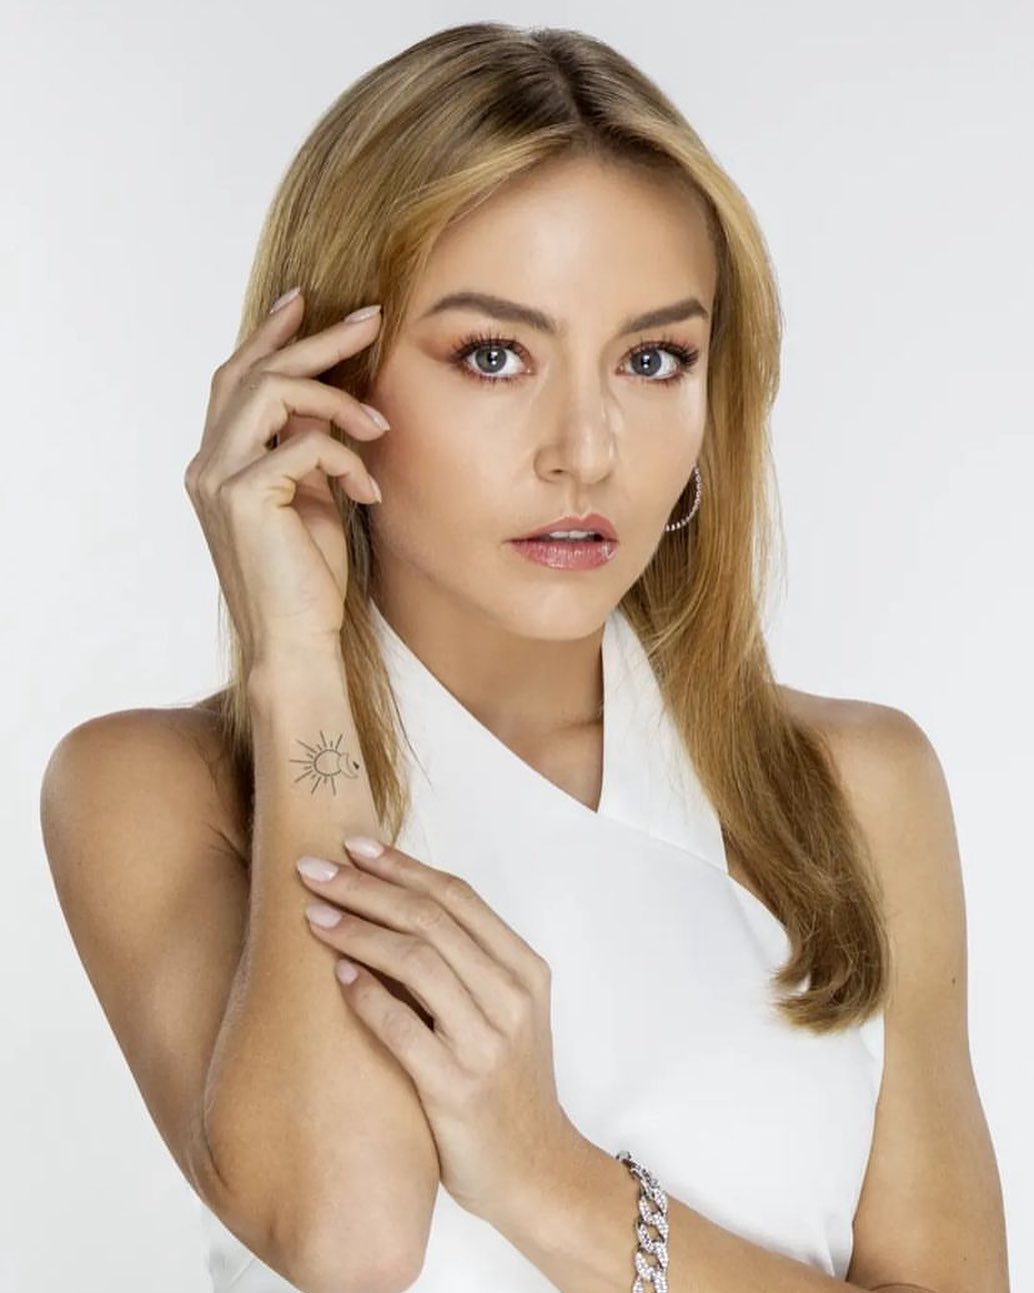 https://b.radikal.host/2023/03/14/Photo-shared-by-El-Amor-Invencible-on-February-15-2023-tagging-angeliqueboyer-juanosorio.oficial-and-elamorinvencible.-May-be-a-closeup-of-1-person..jpg